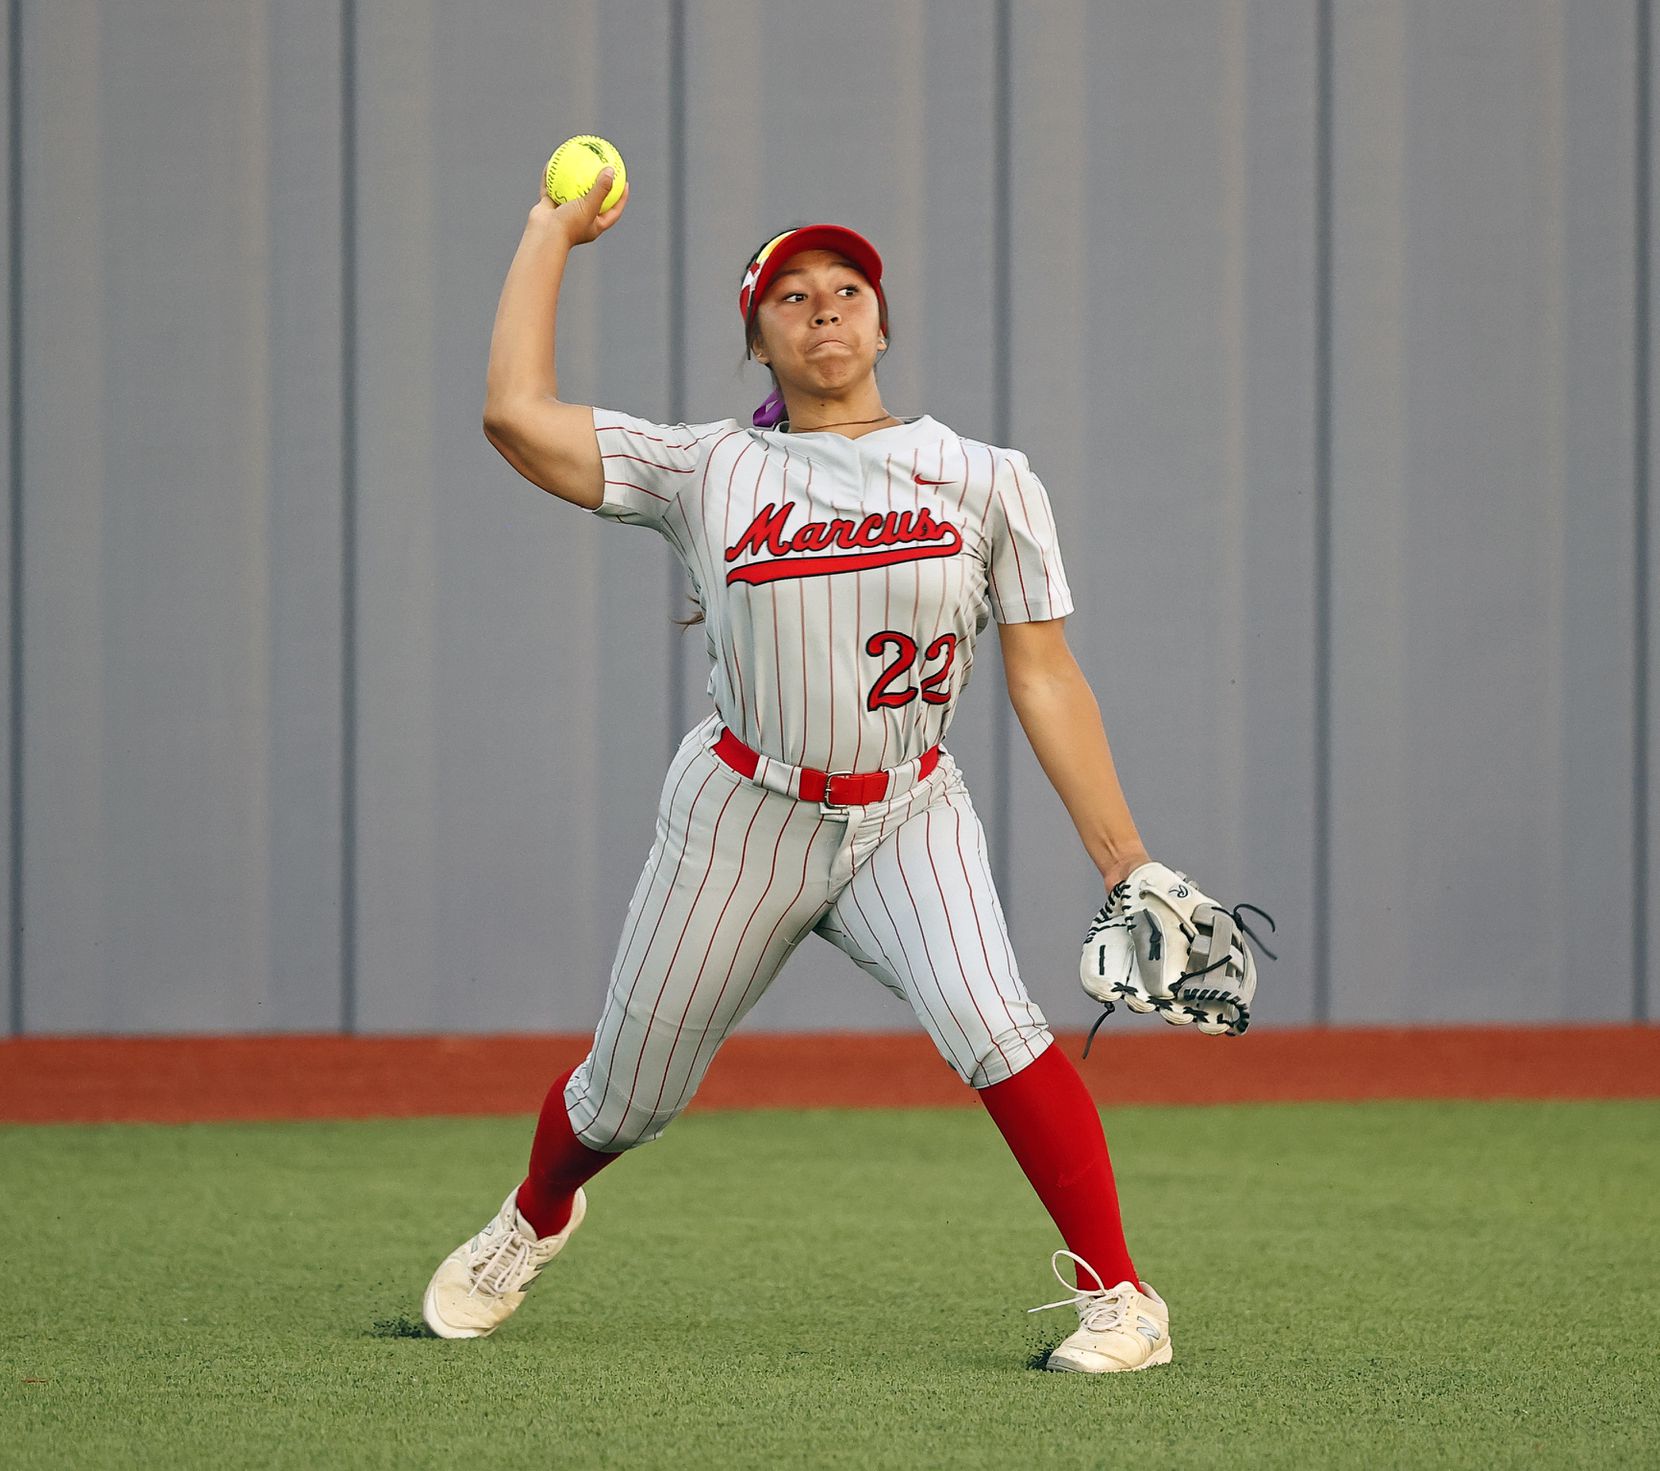 Flower Mound Marcus' Mikaela Olguin (22) throws the ball during the game against El Paso...